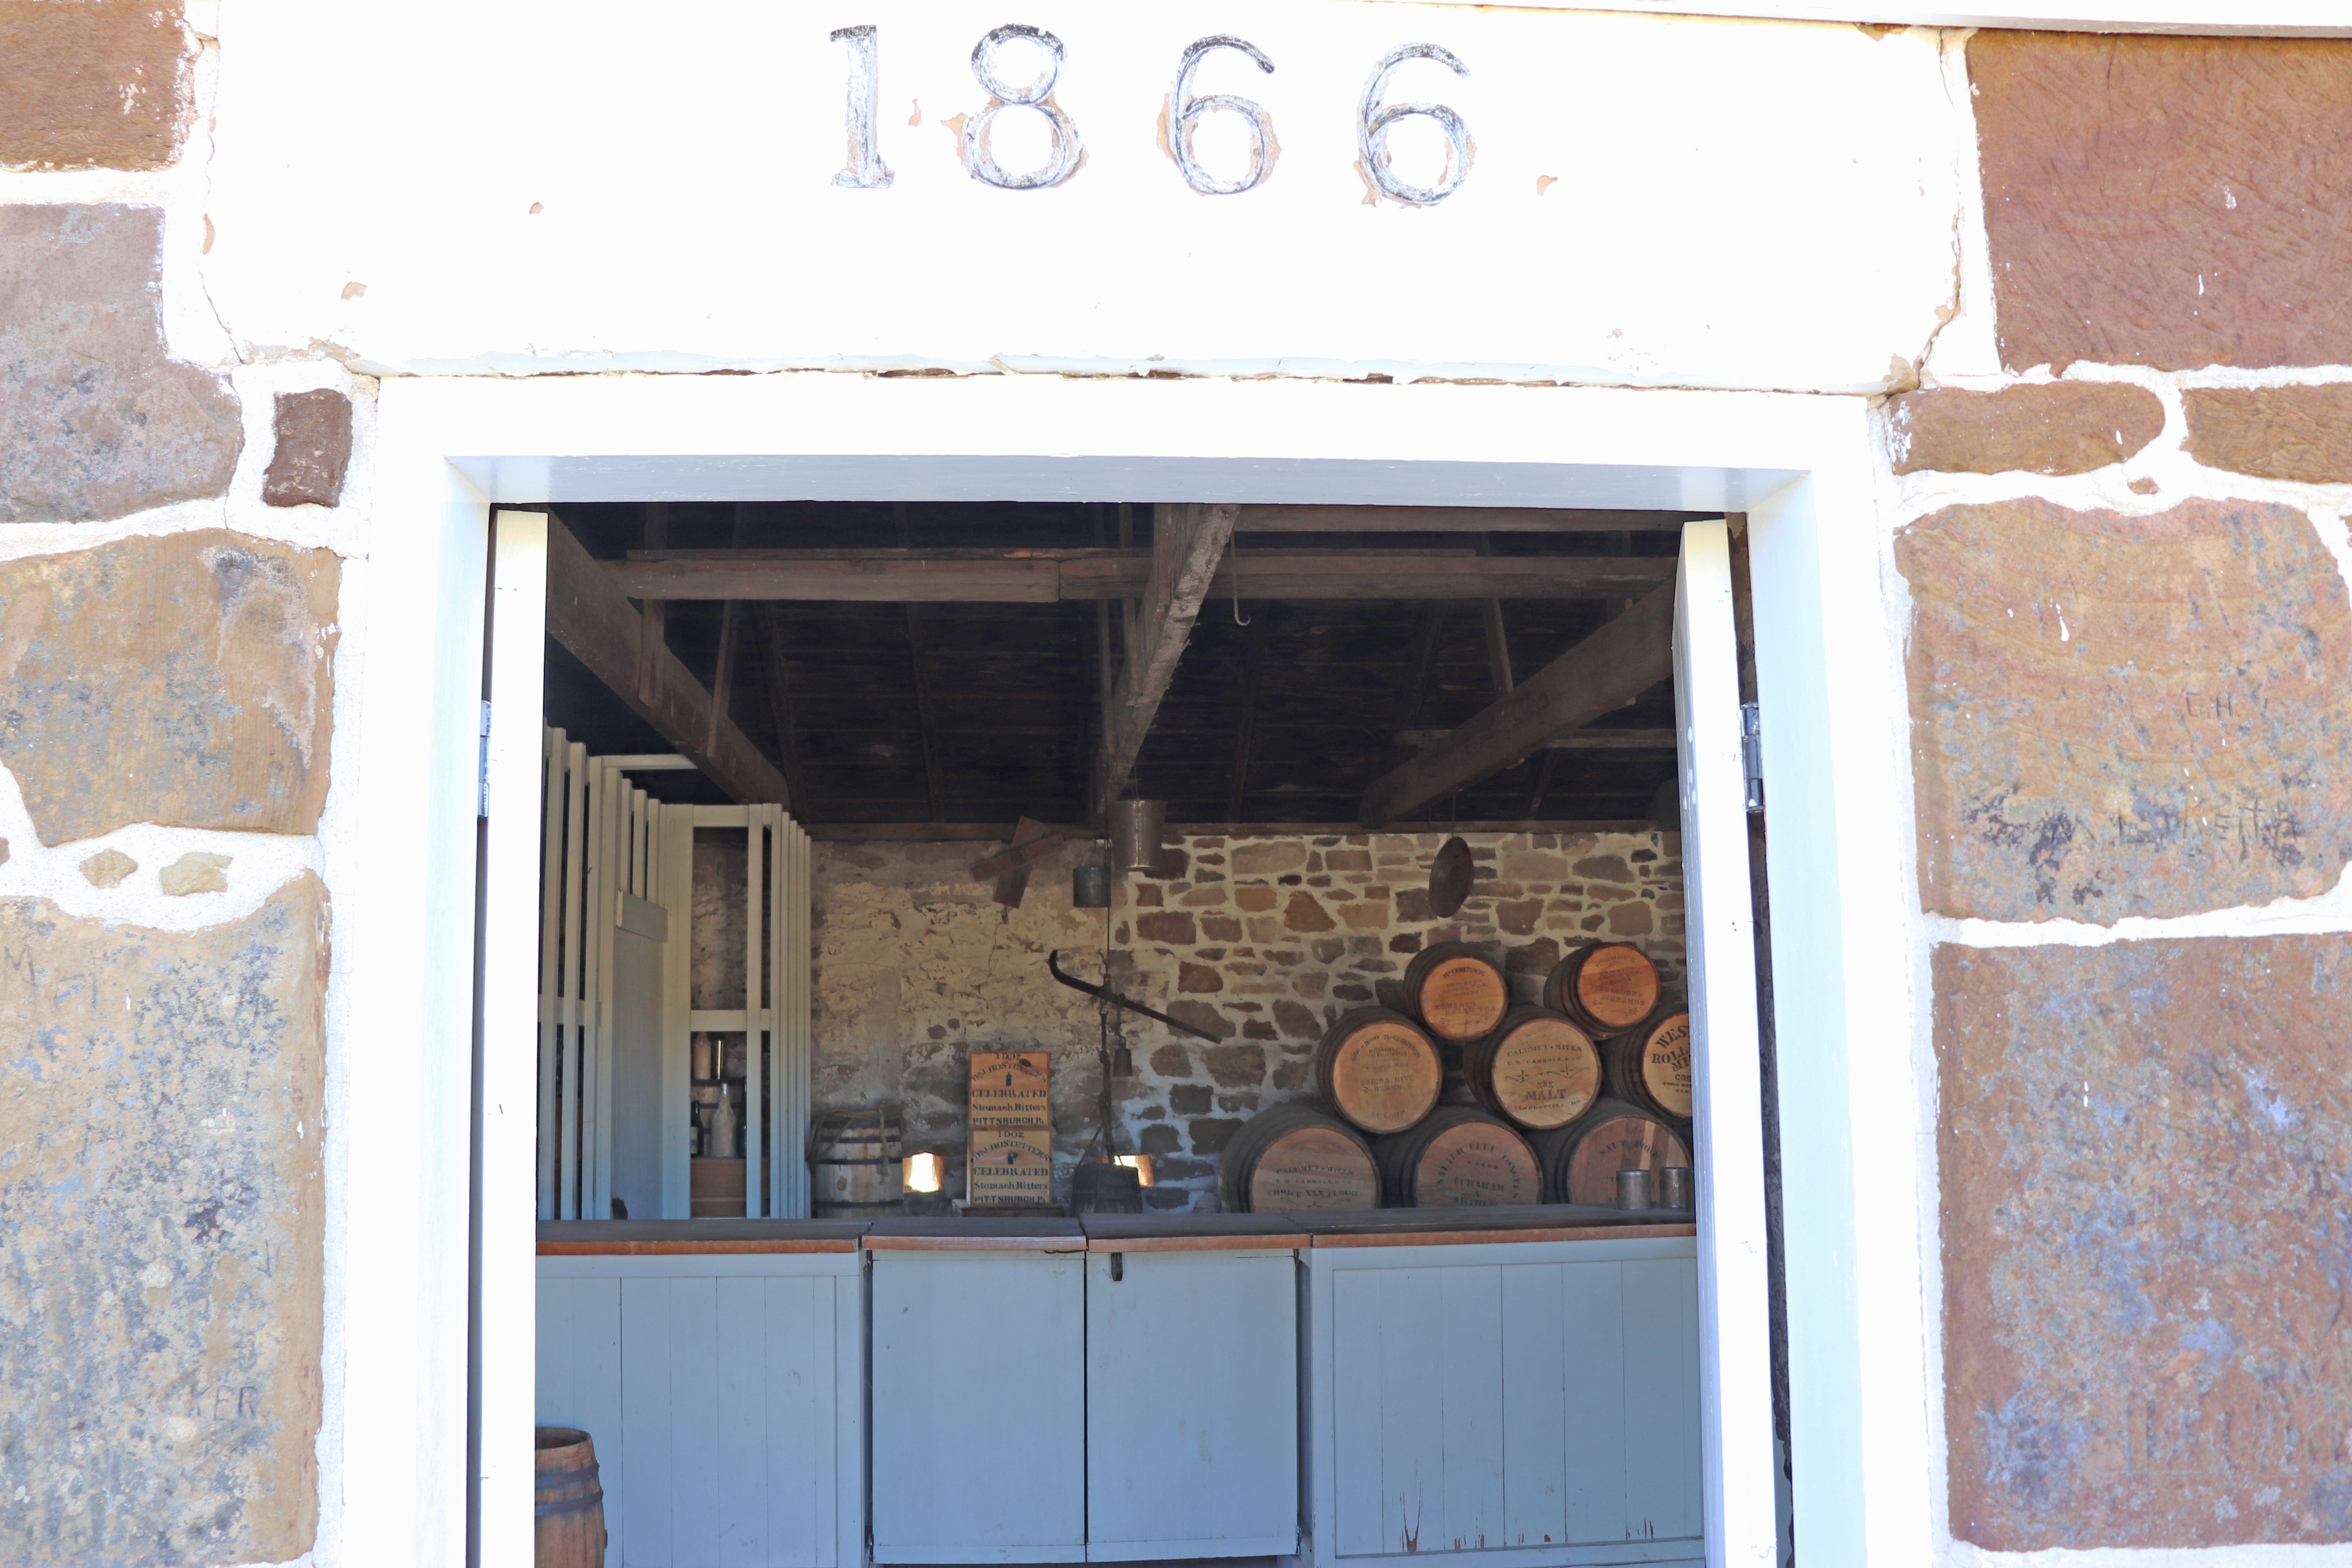 The commissary is the oldest building at Fort Larned National Historic Site.